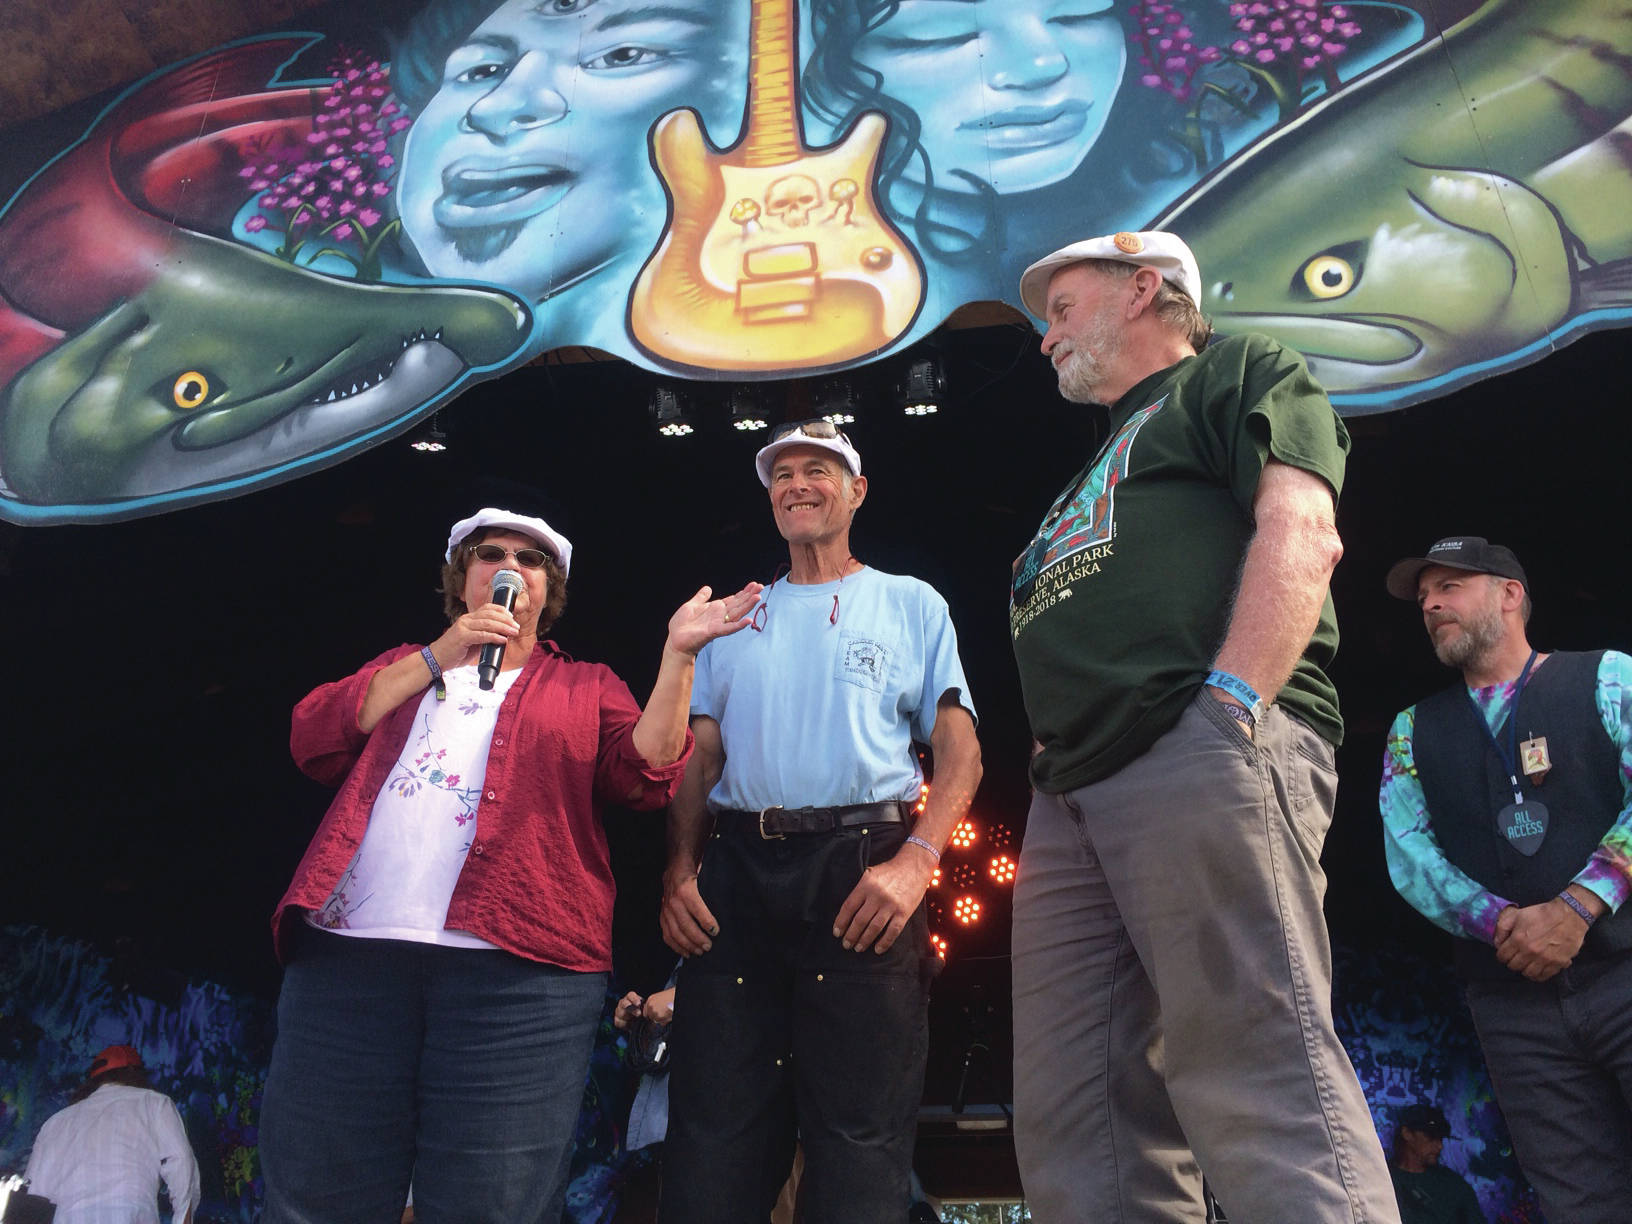 From left to right, Kate Mitchell, Dave Seaman and Tim Troll take to the main stage at Salmonfest on Sunday, Aug. 4, 2019, in Ninilchik, Alaska, to tell the crowd about “Sailing Back to the Bay 2020.” (Photo by McKibben Jackinsky)